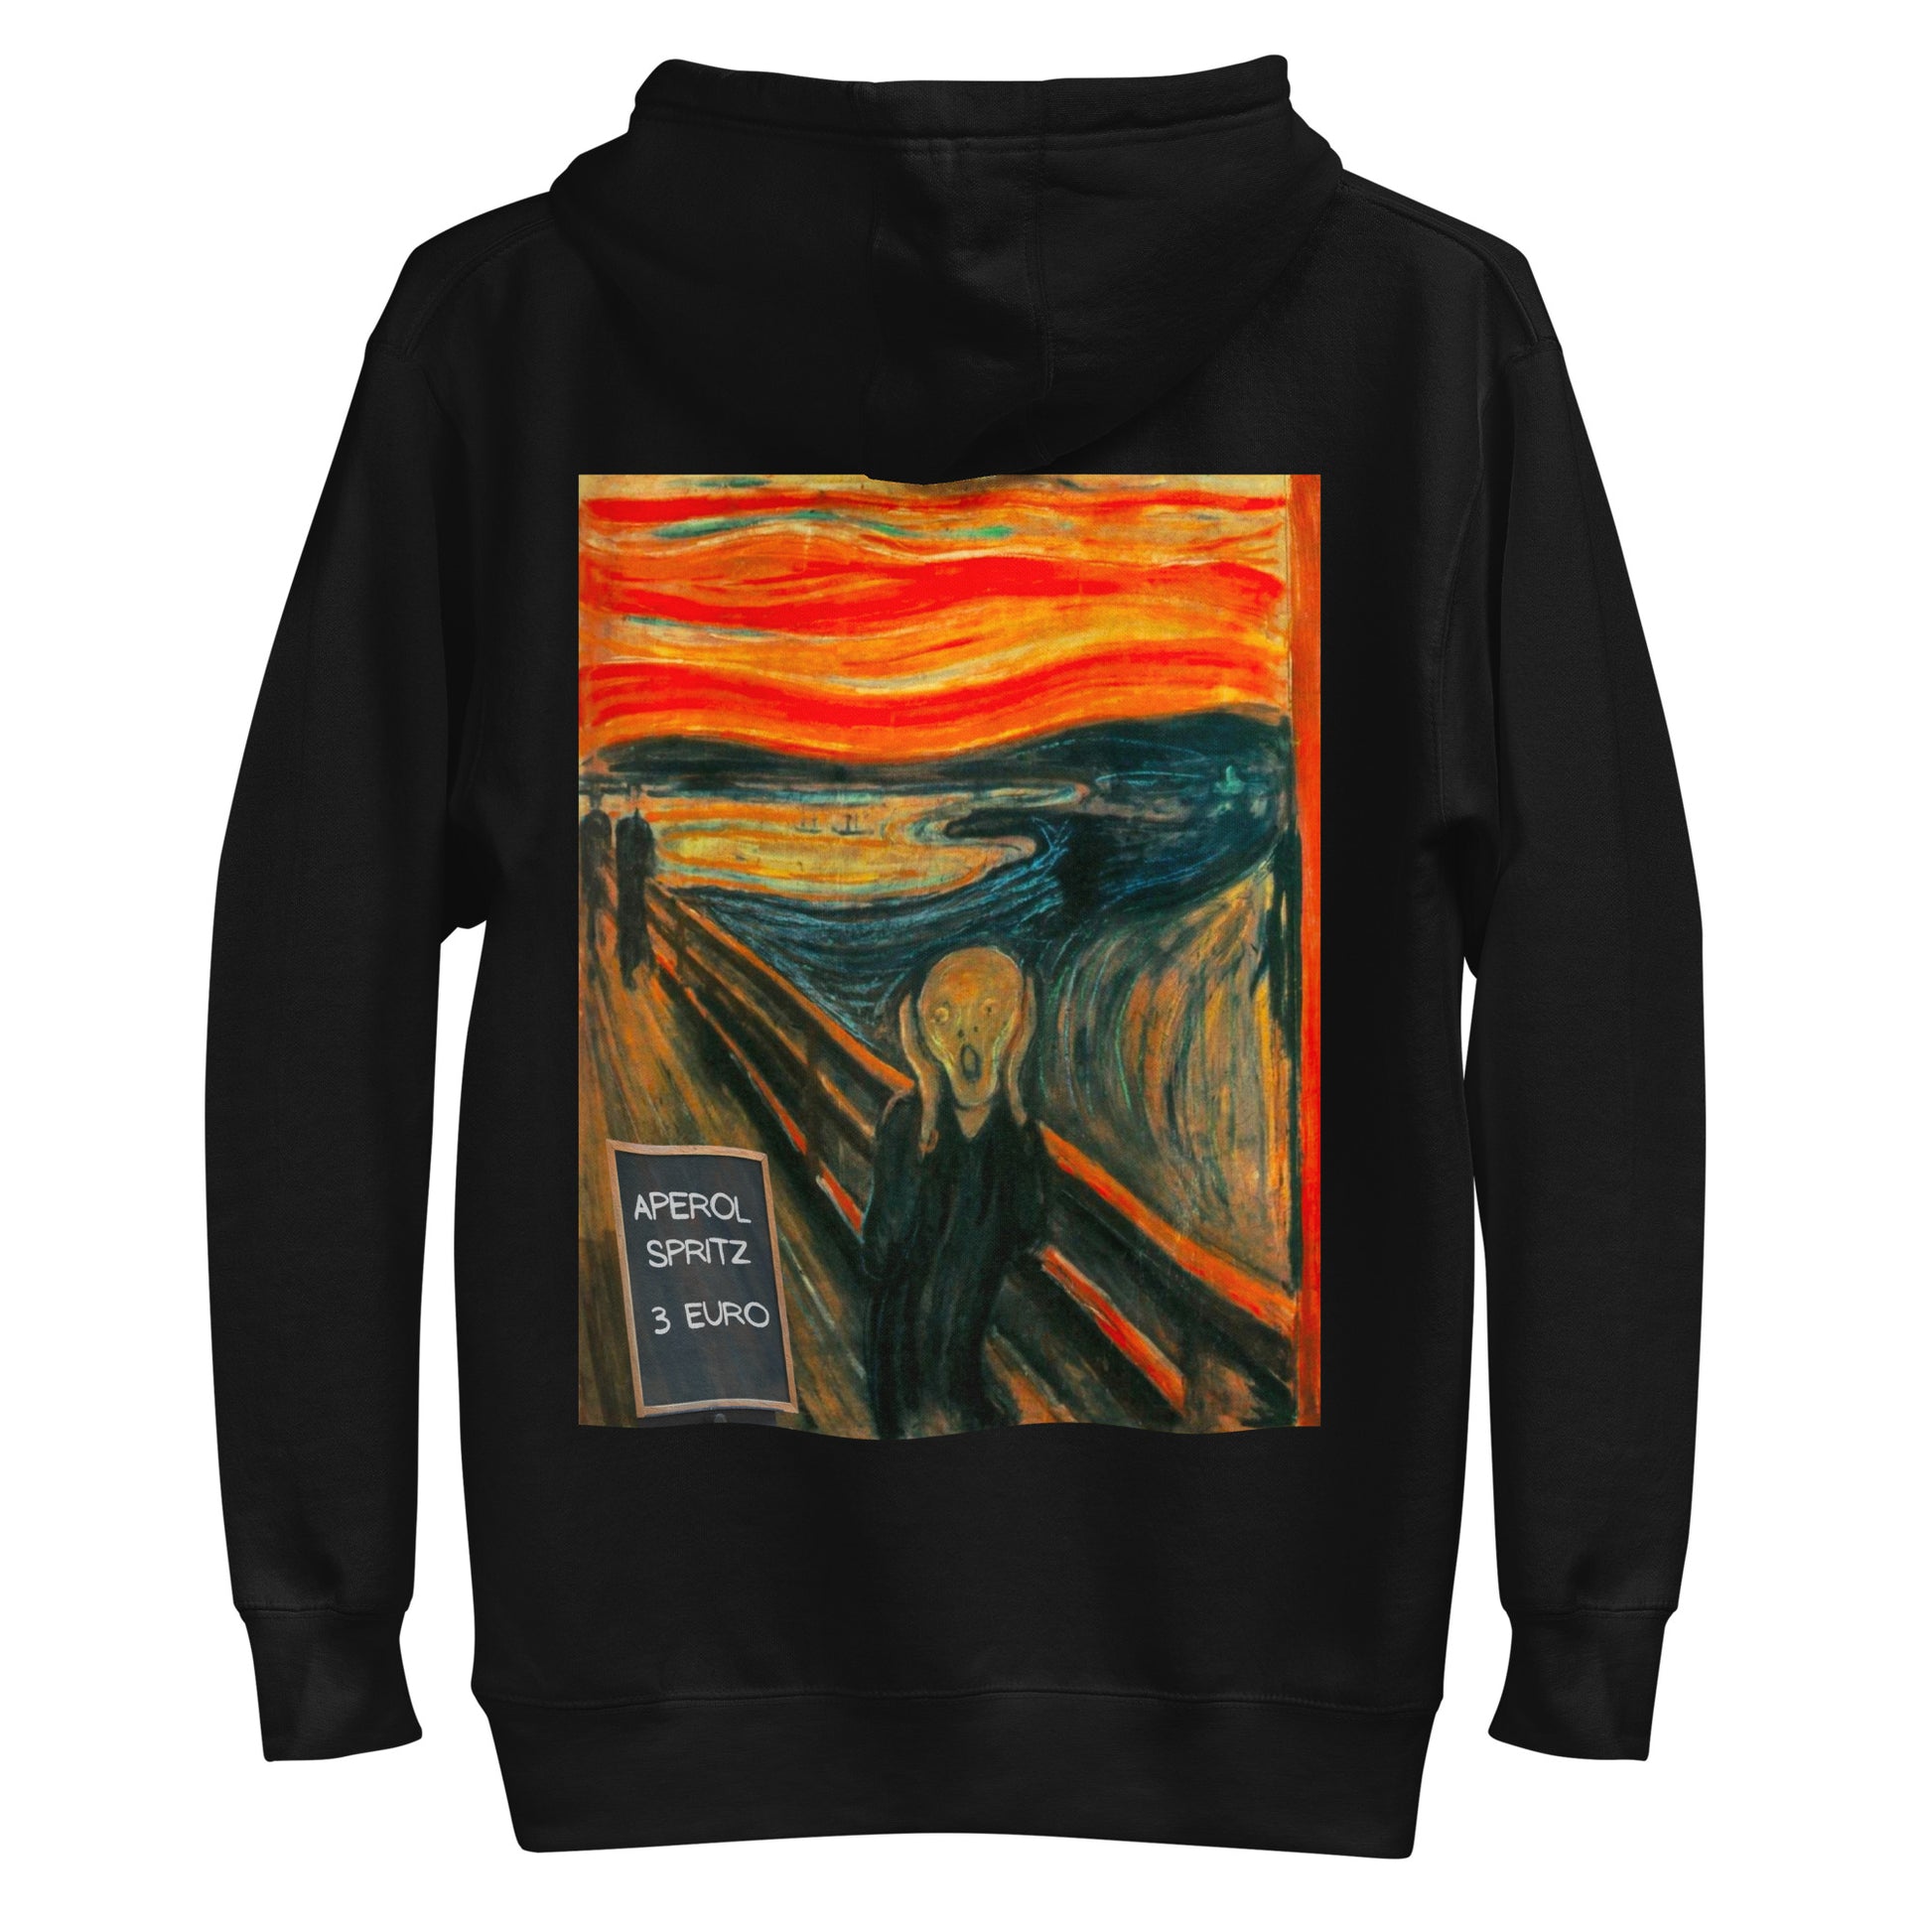 "L'urlo" di Munch - Hoodie (Limited Edition) - Flipness